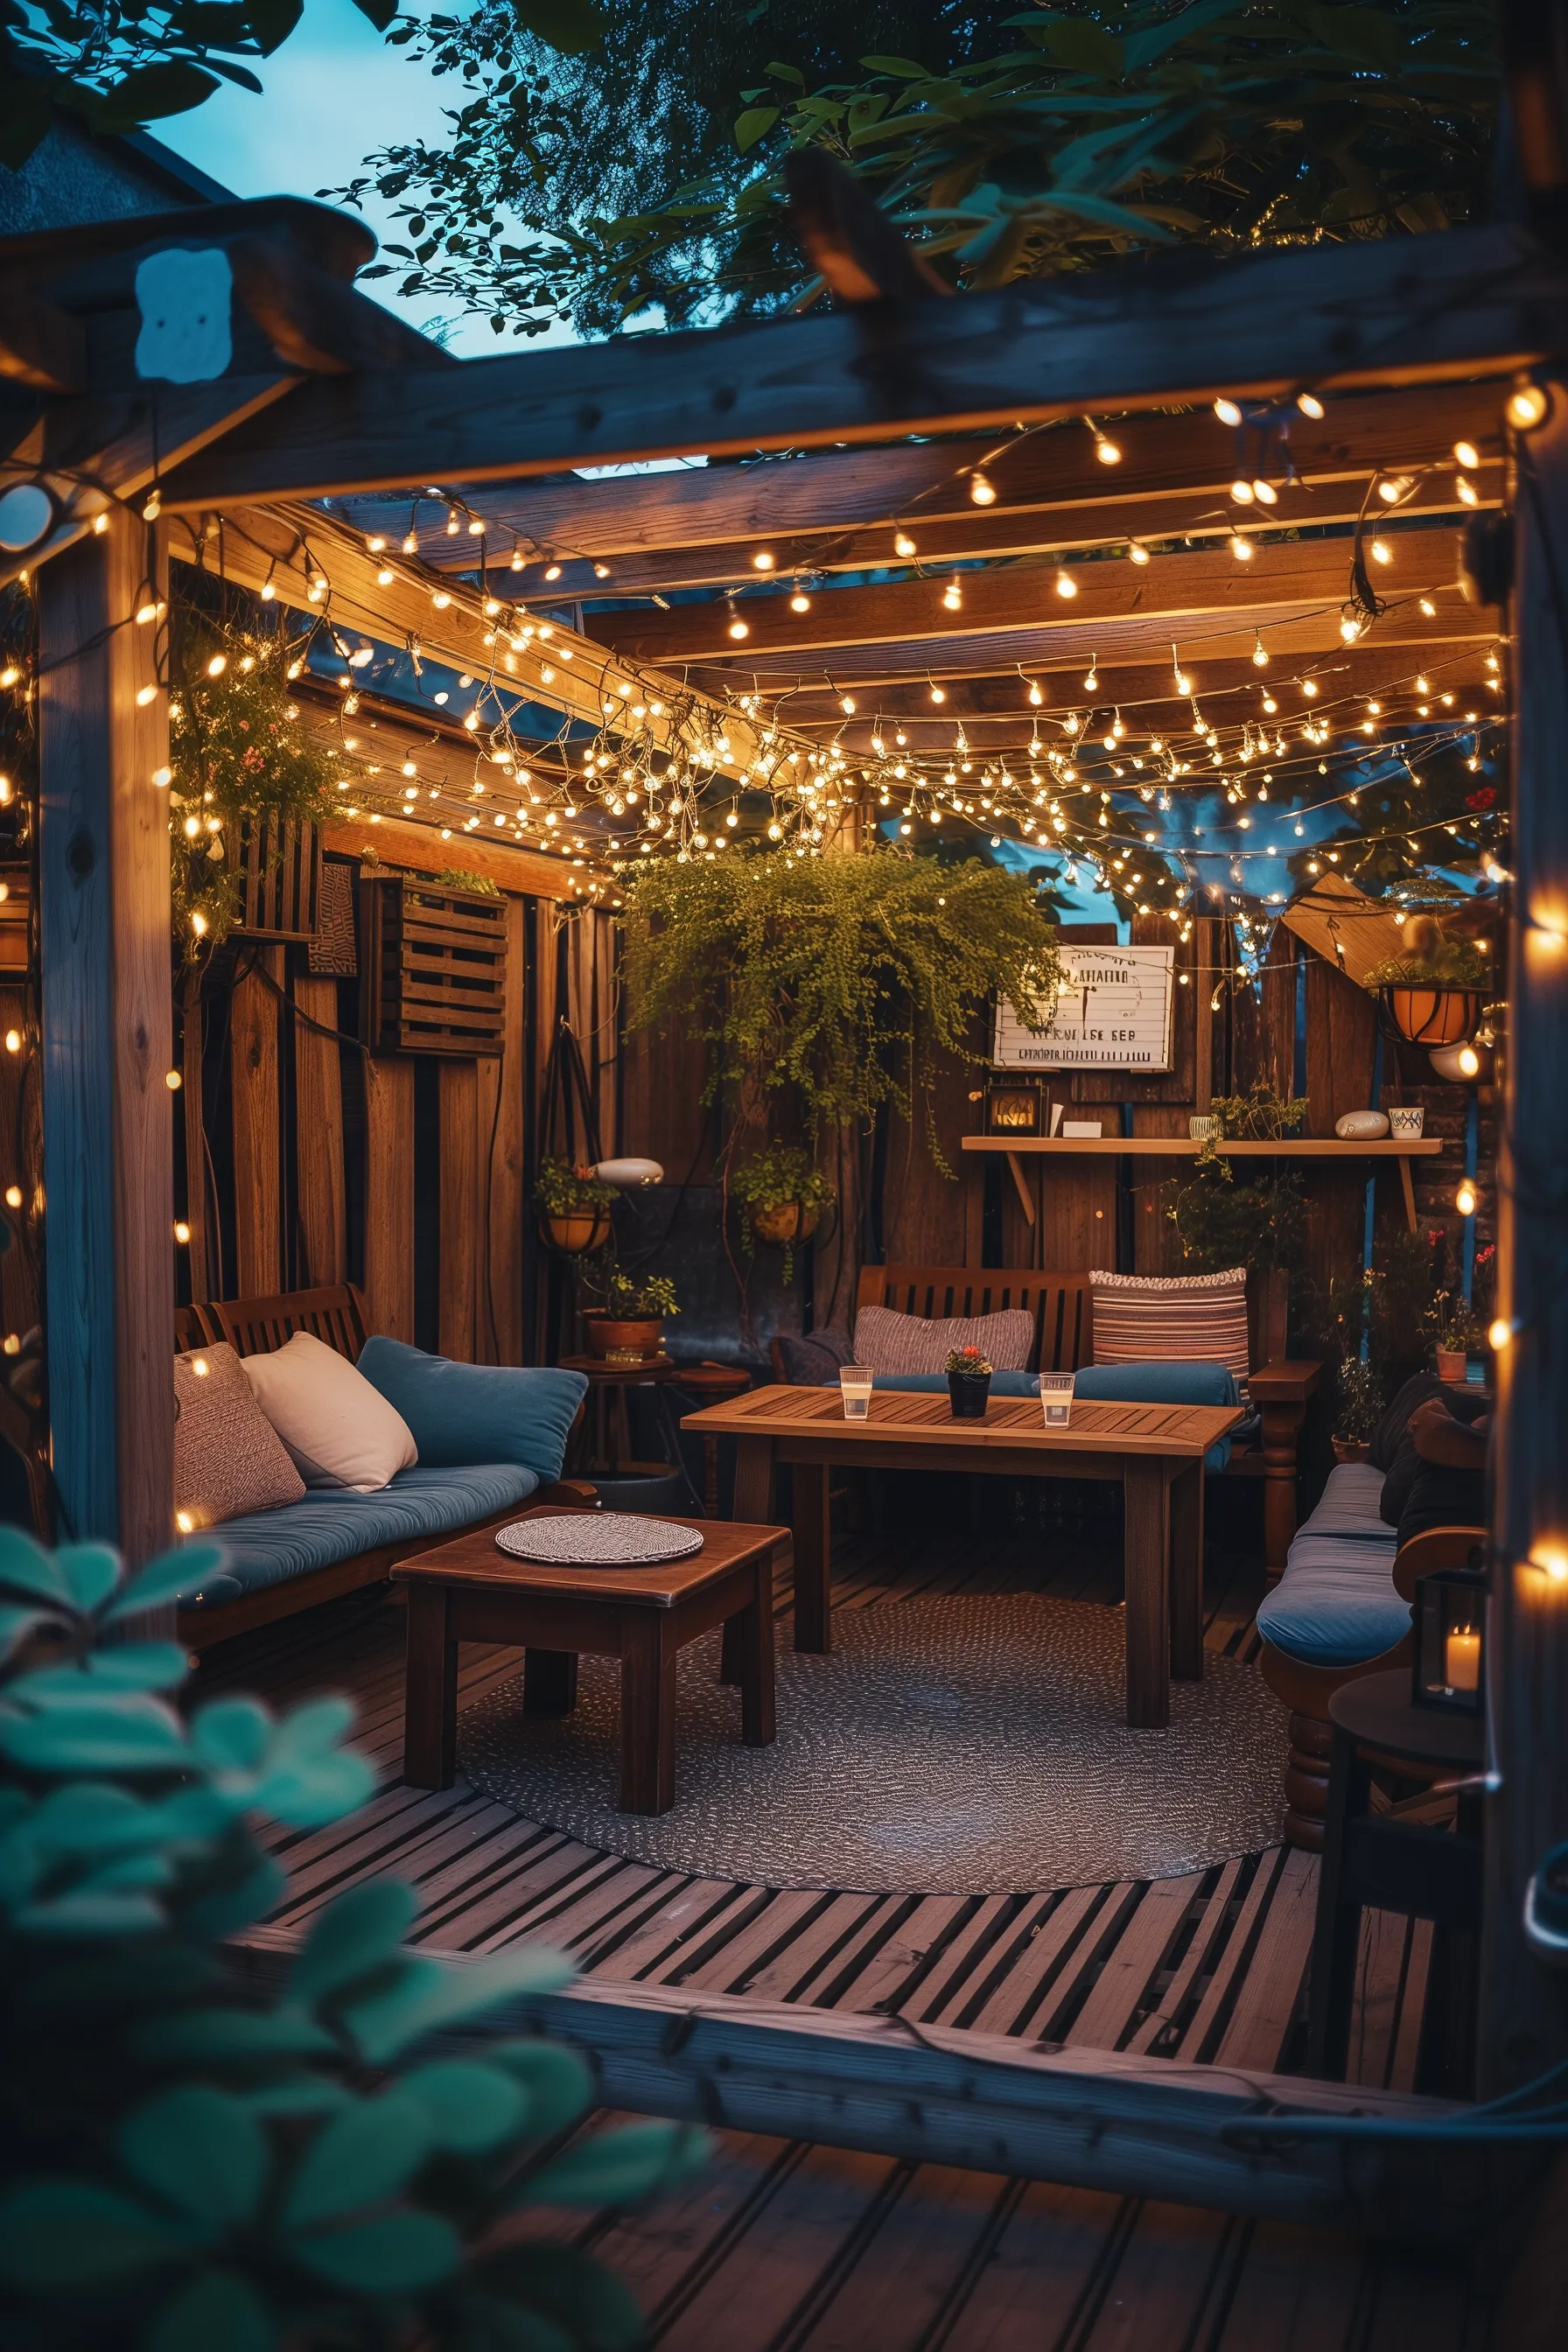 An aesthetic outdoor man cave shed with fairy lights and outdoor seating